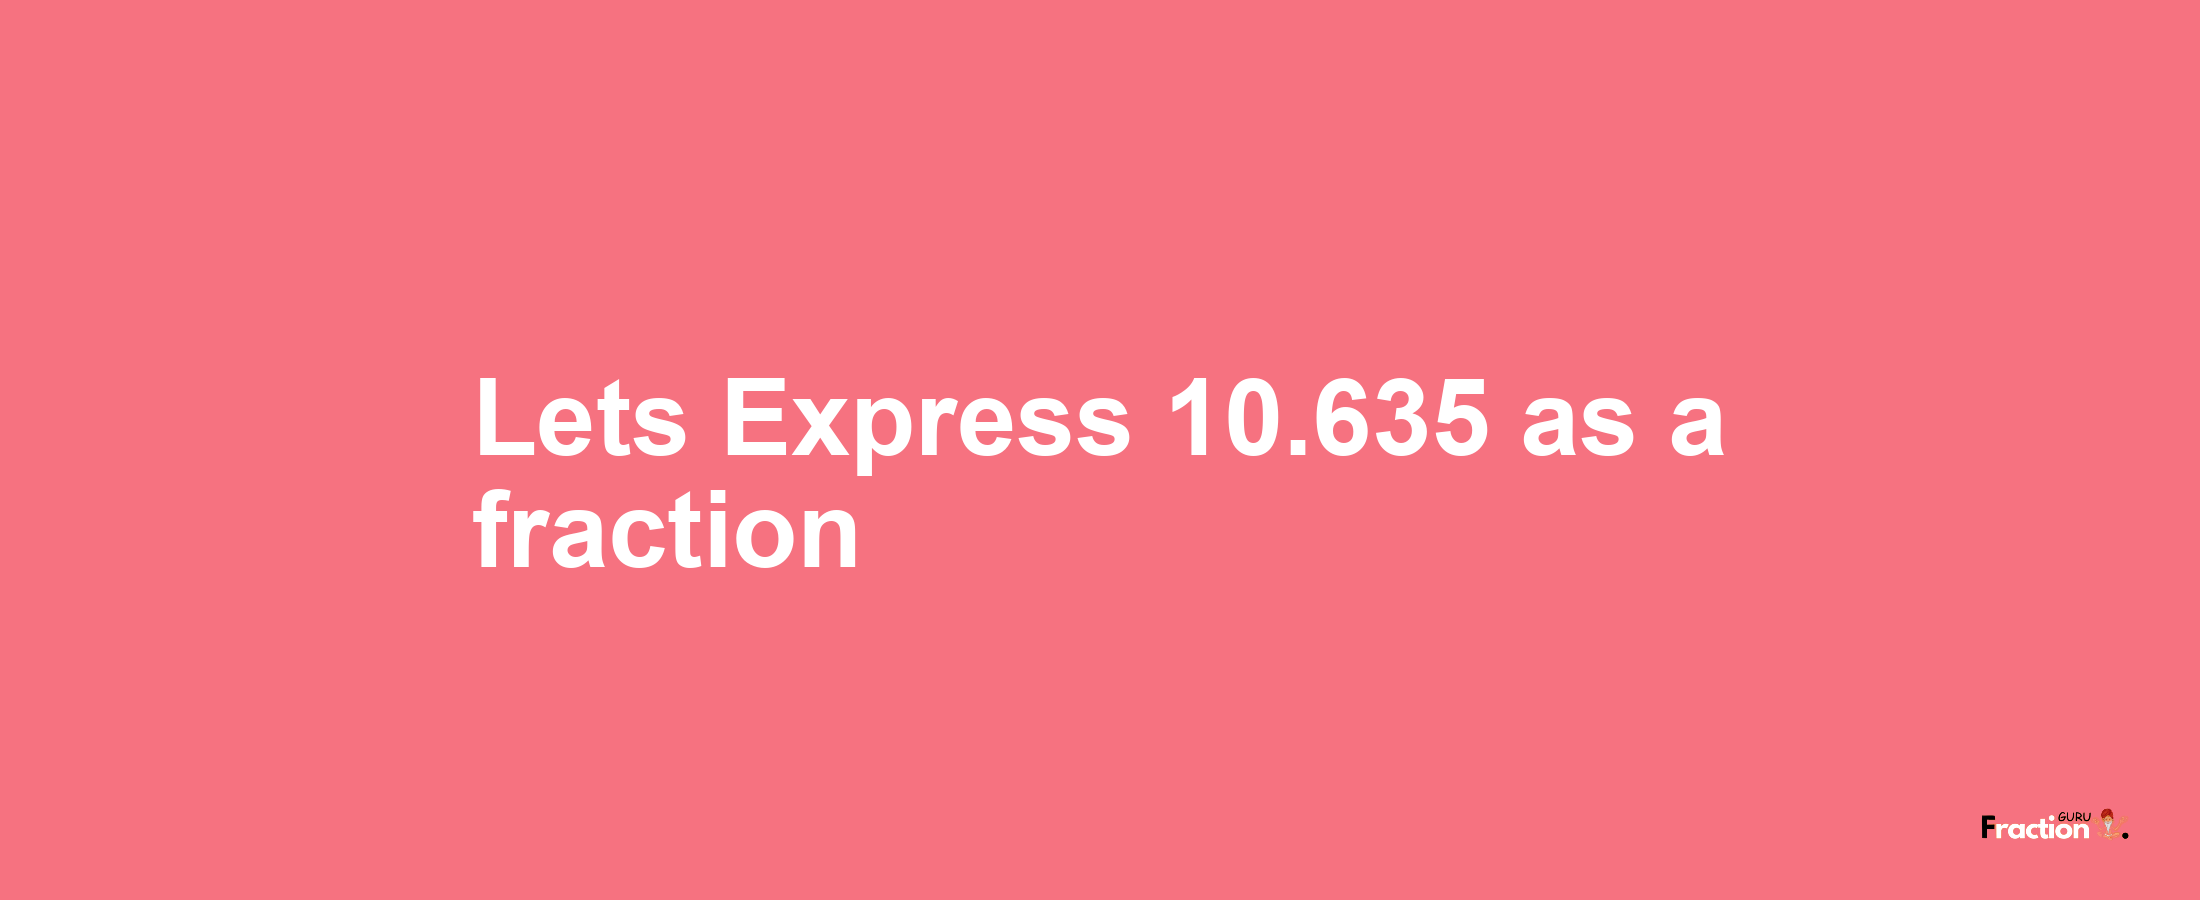 Lets Express 10.635 as afraction